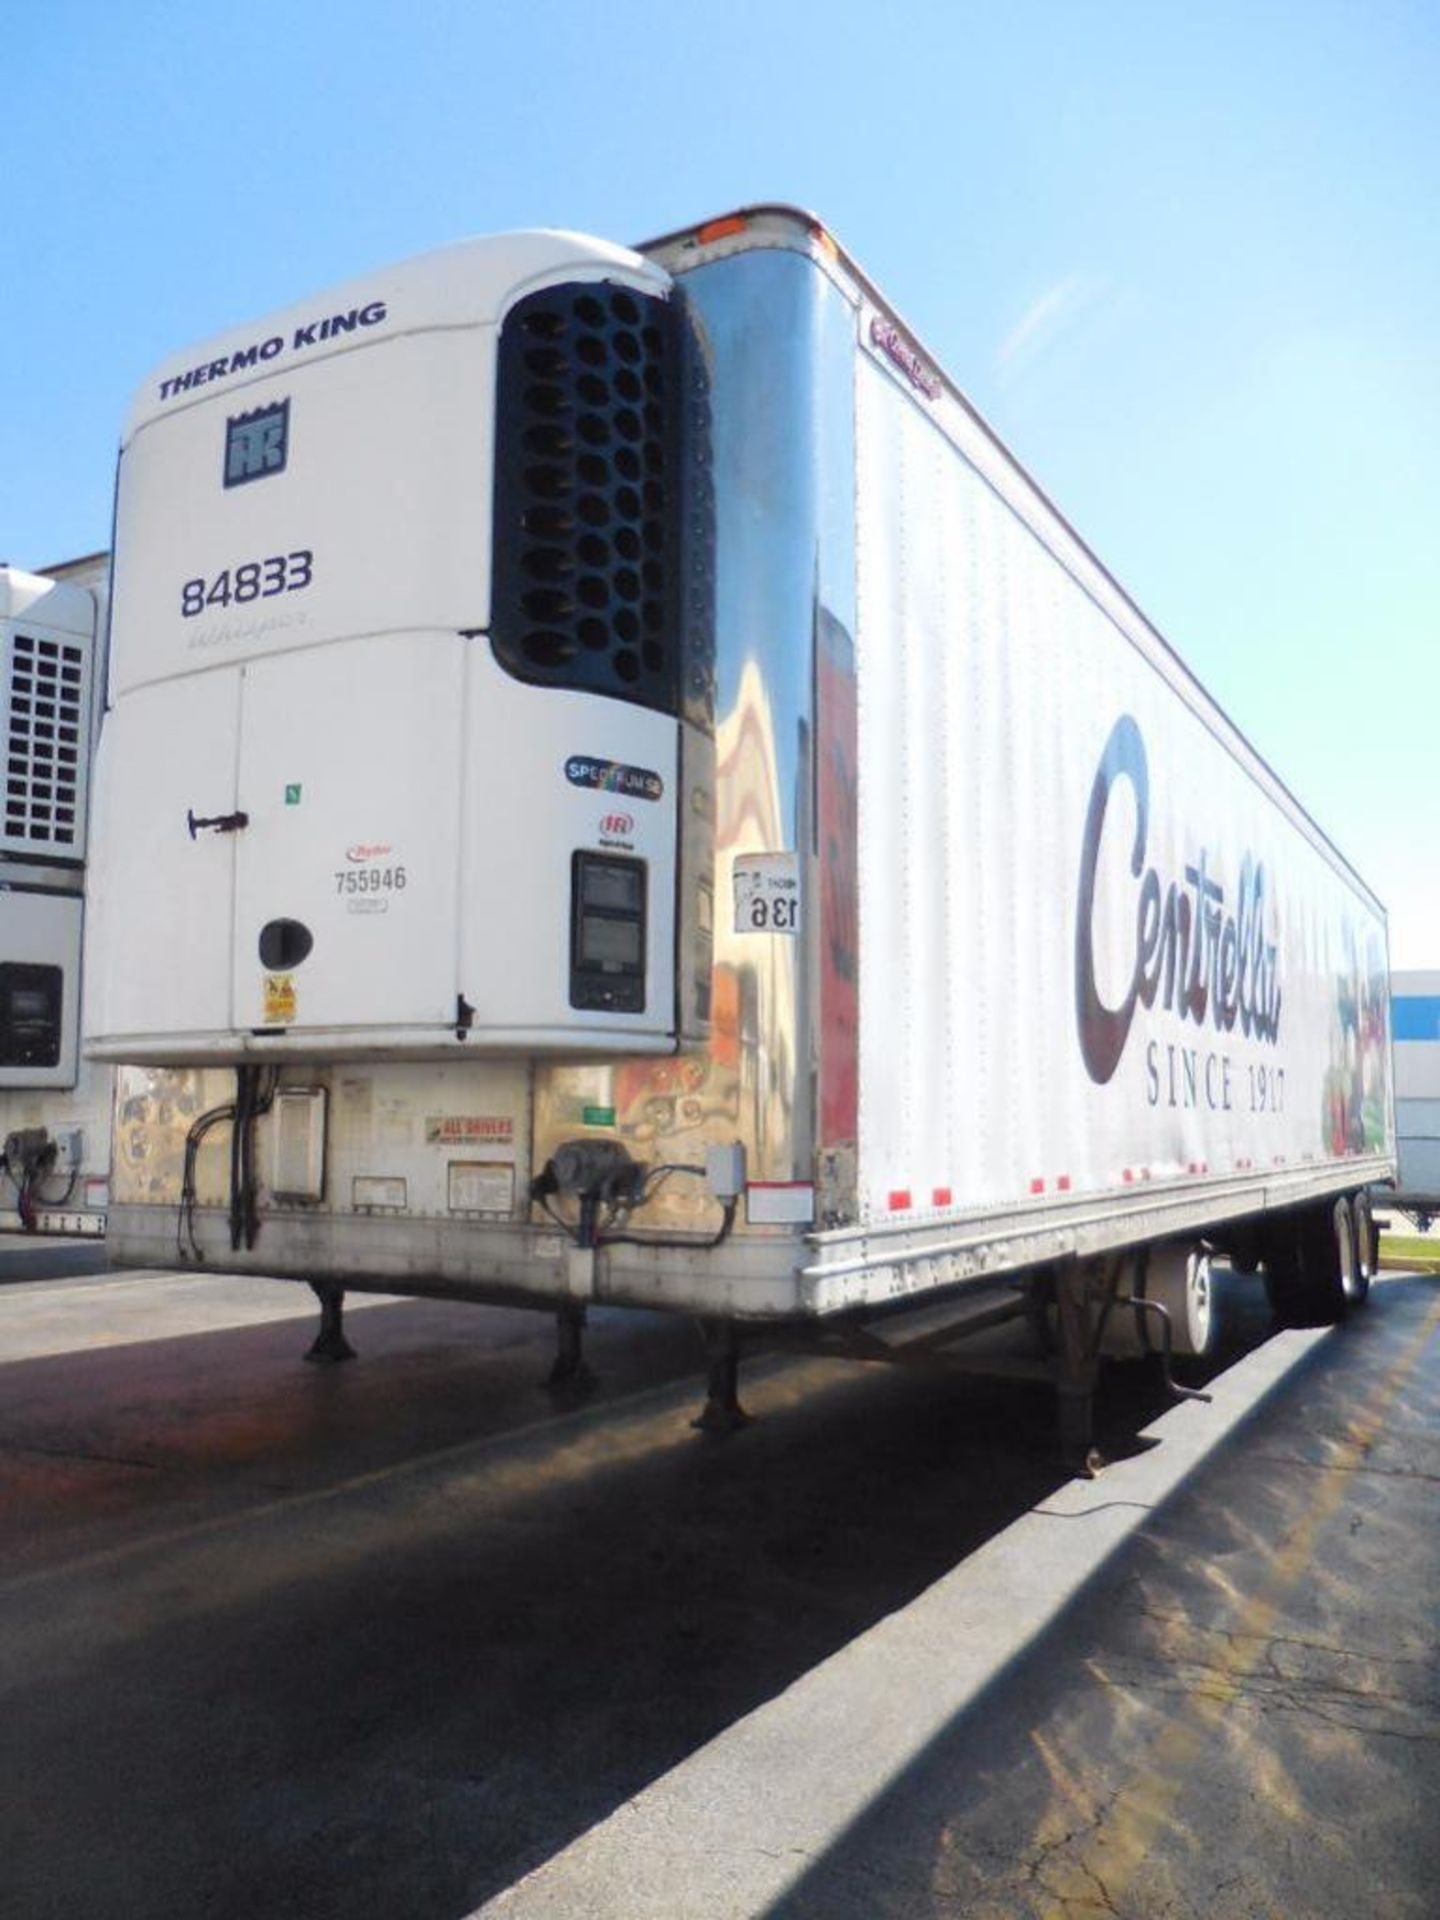 2004 Great Dane 48' Refrigerated Trailer, VIN # 1GRAA96245B703097, Unit 84833 - Image 3 of 16